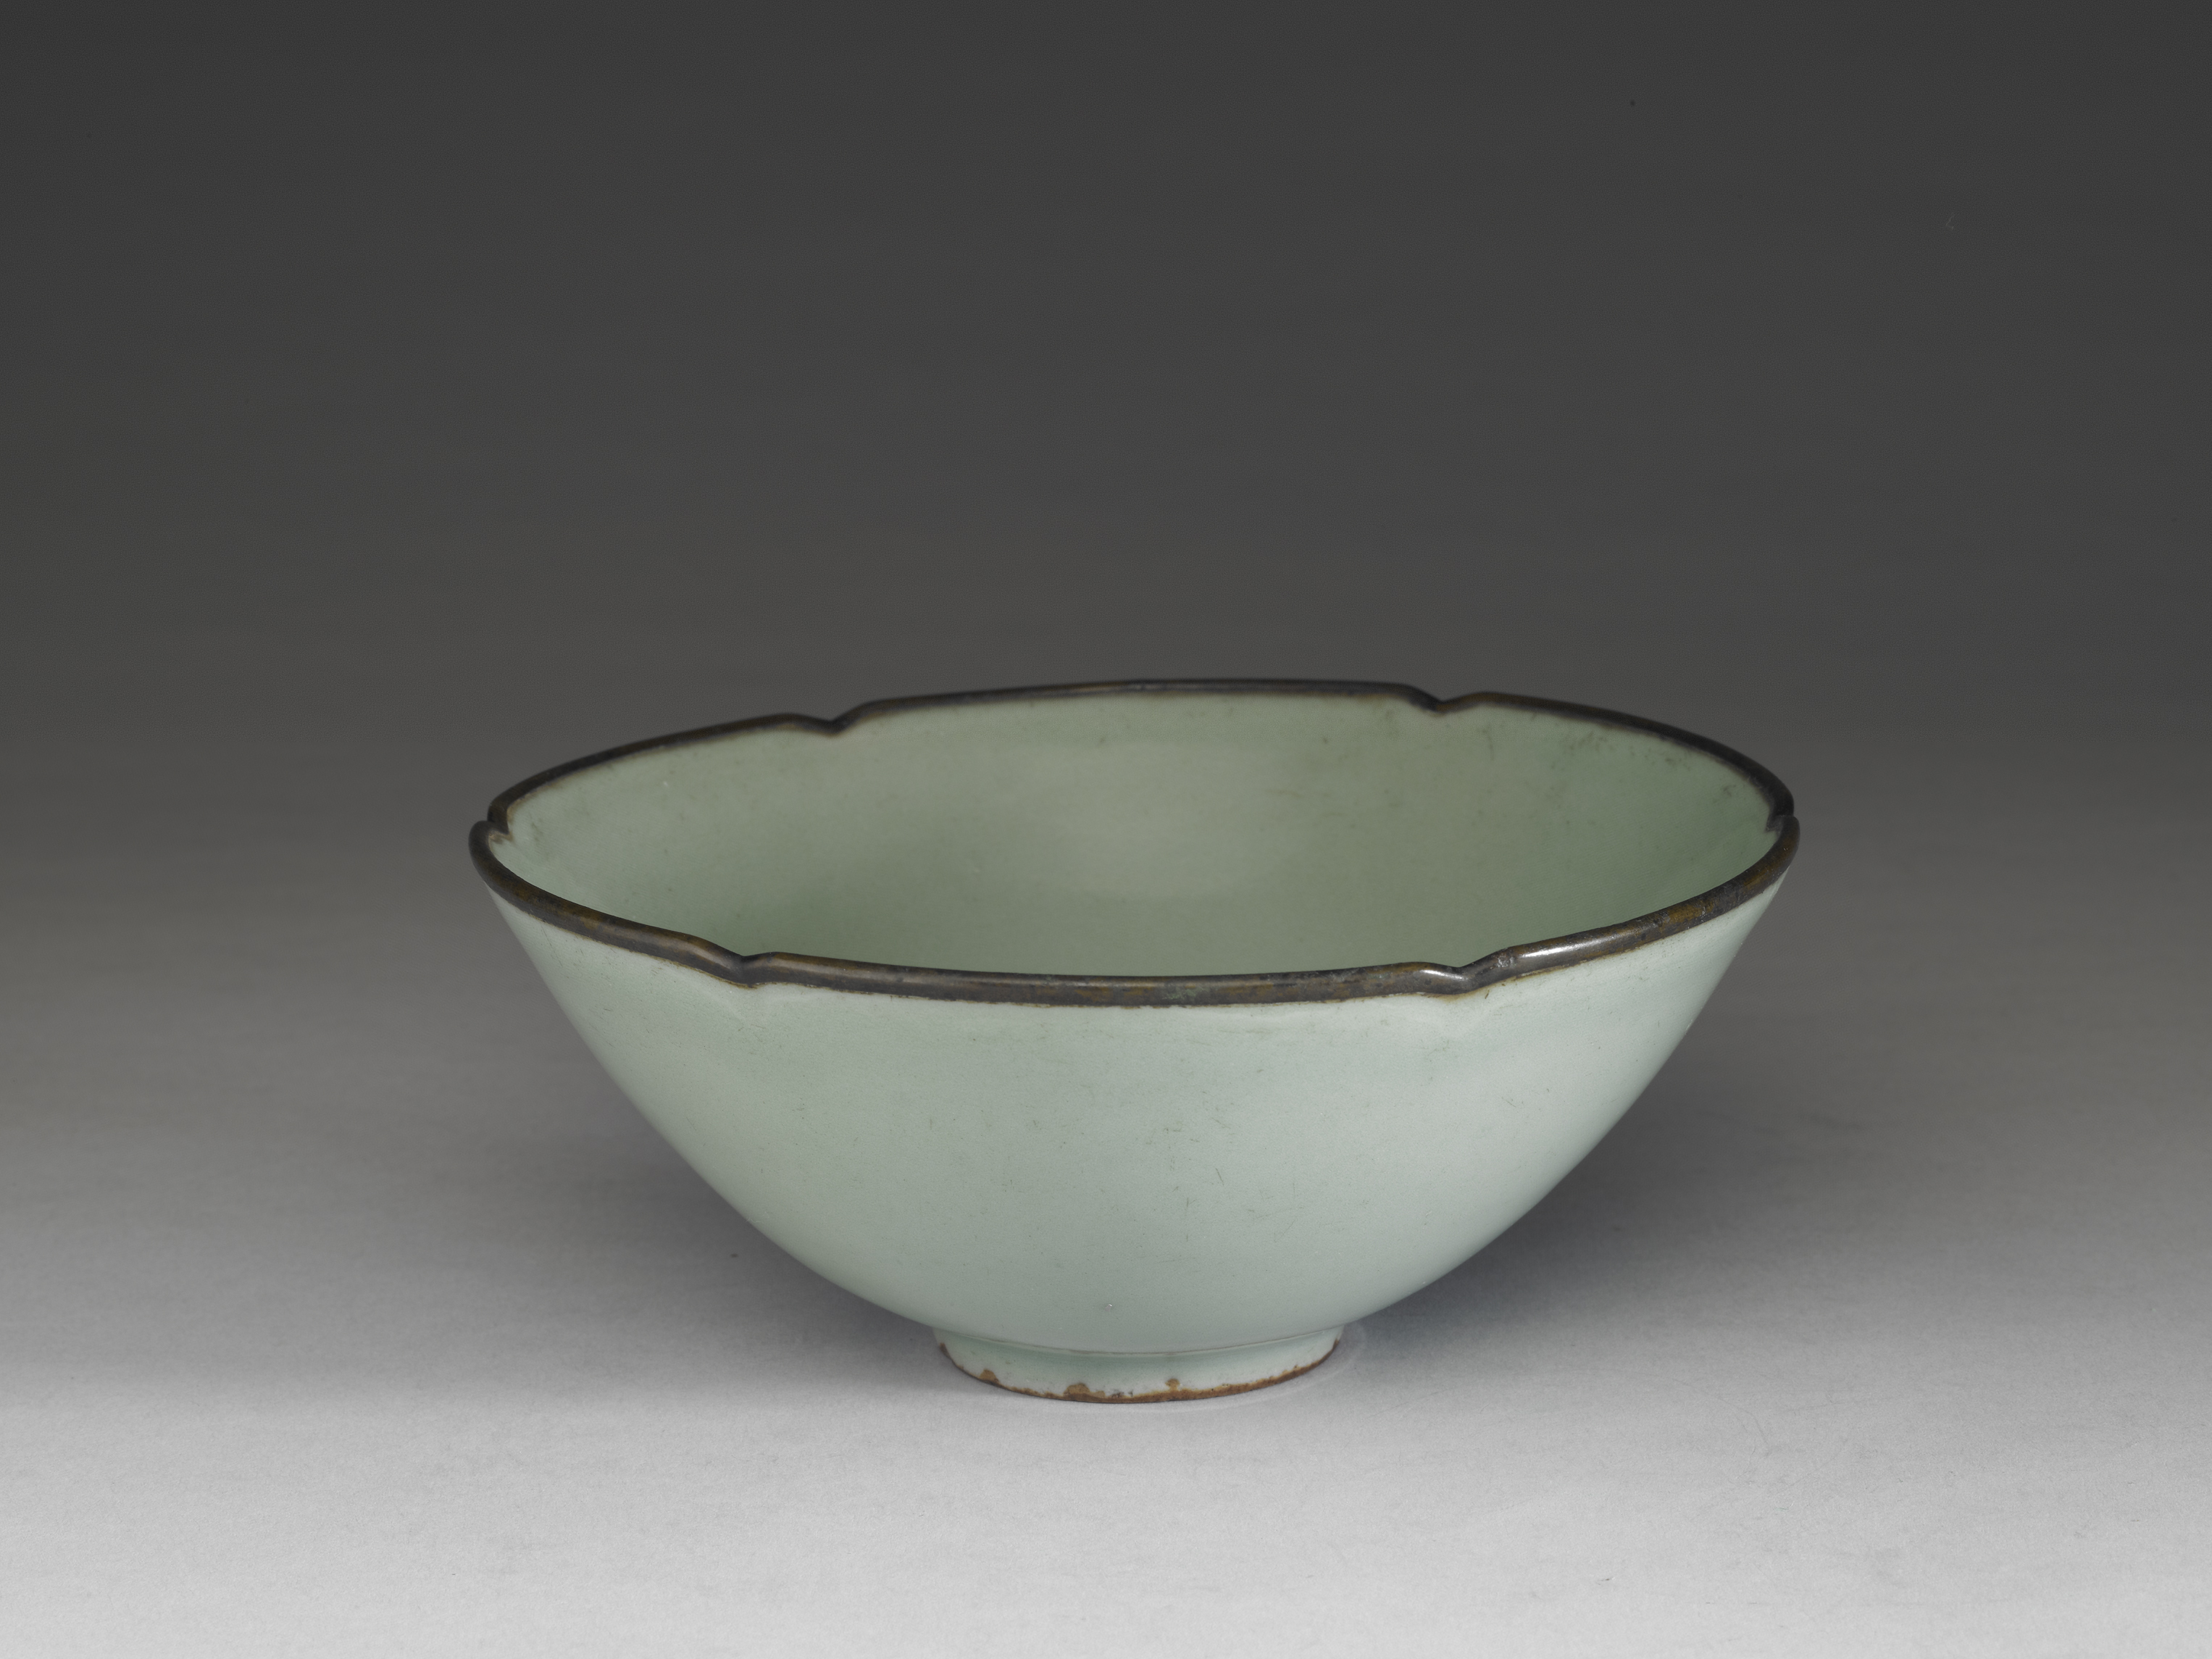 Bowl with hibiscus-shaped rim in celadon glaze
Longquan ware, Southern Song dynasty, 13th century
